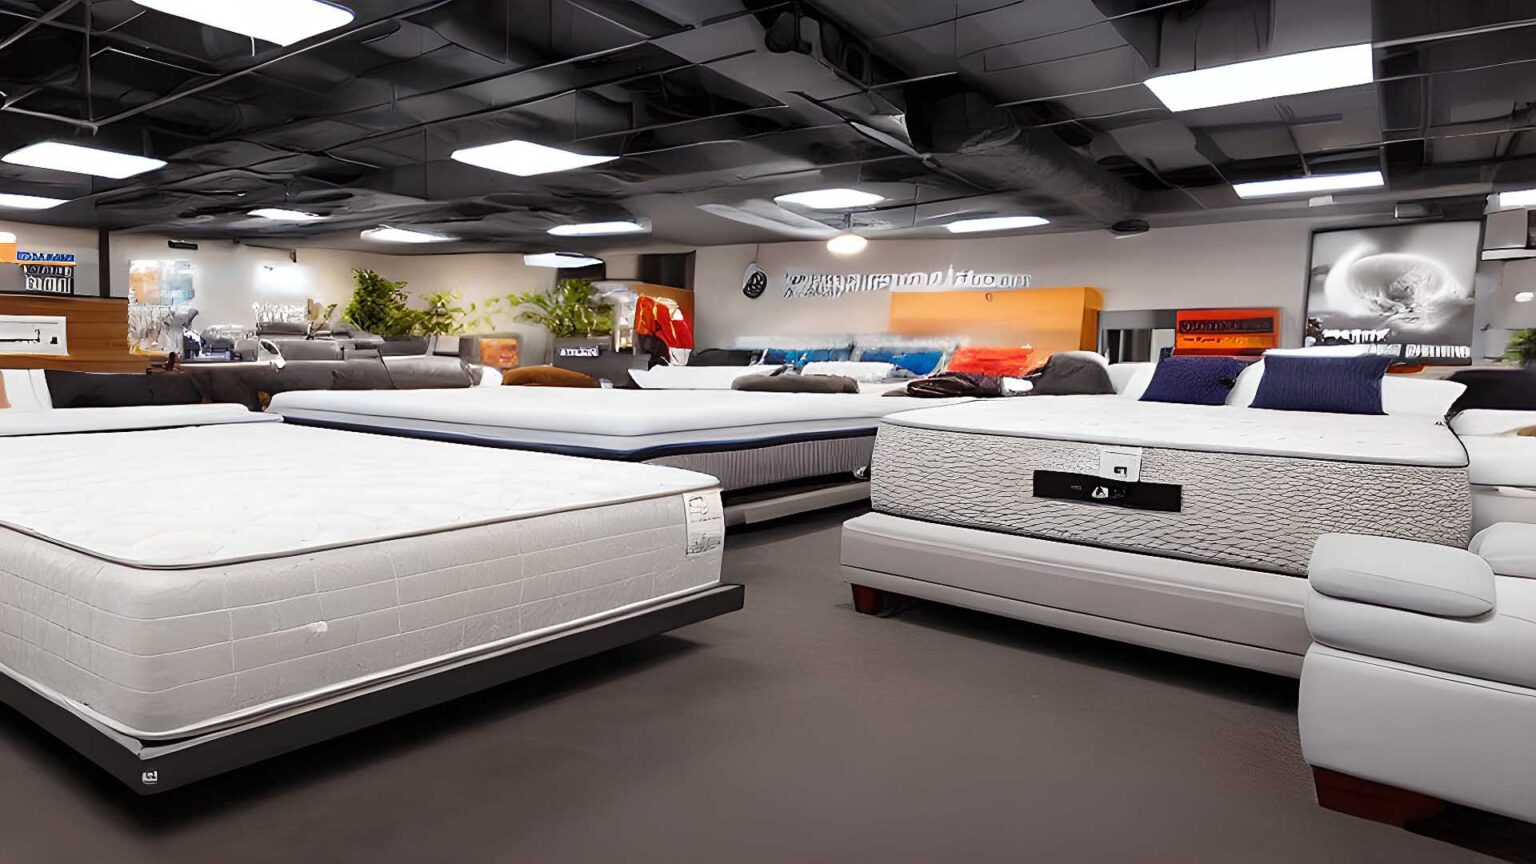 Mattress Stores, mattress dealers, and mattress retailers near me in Des Moines, IA